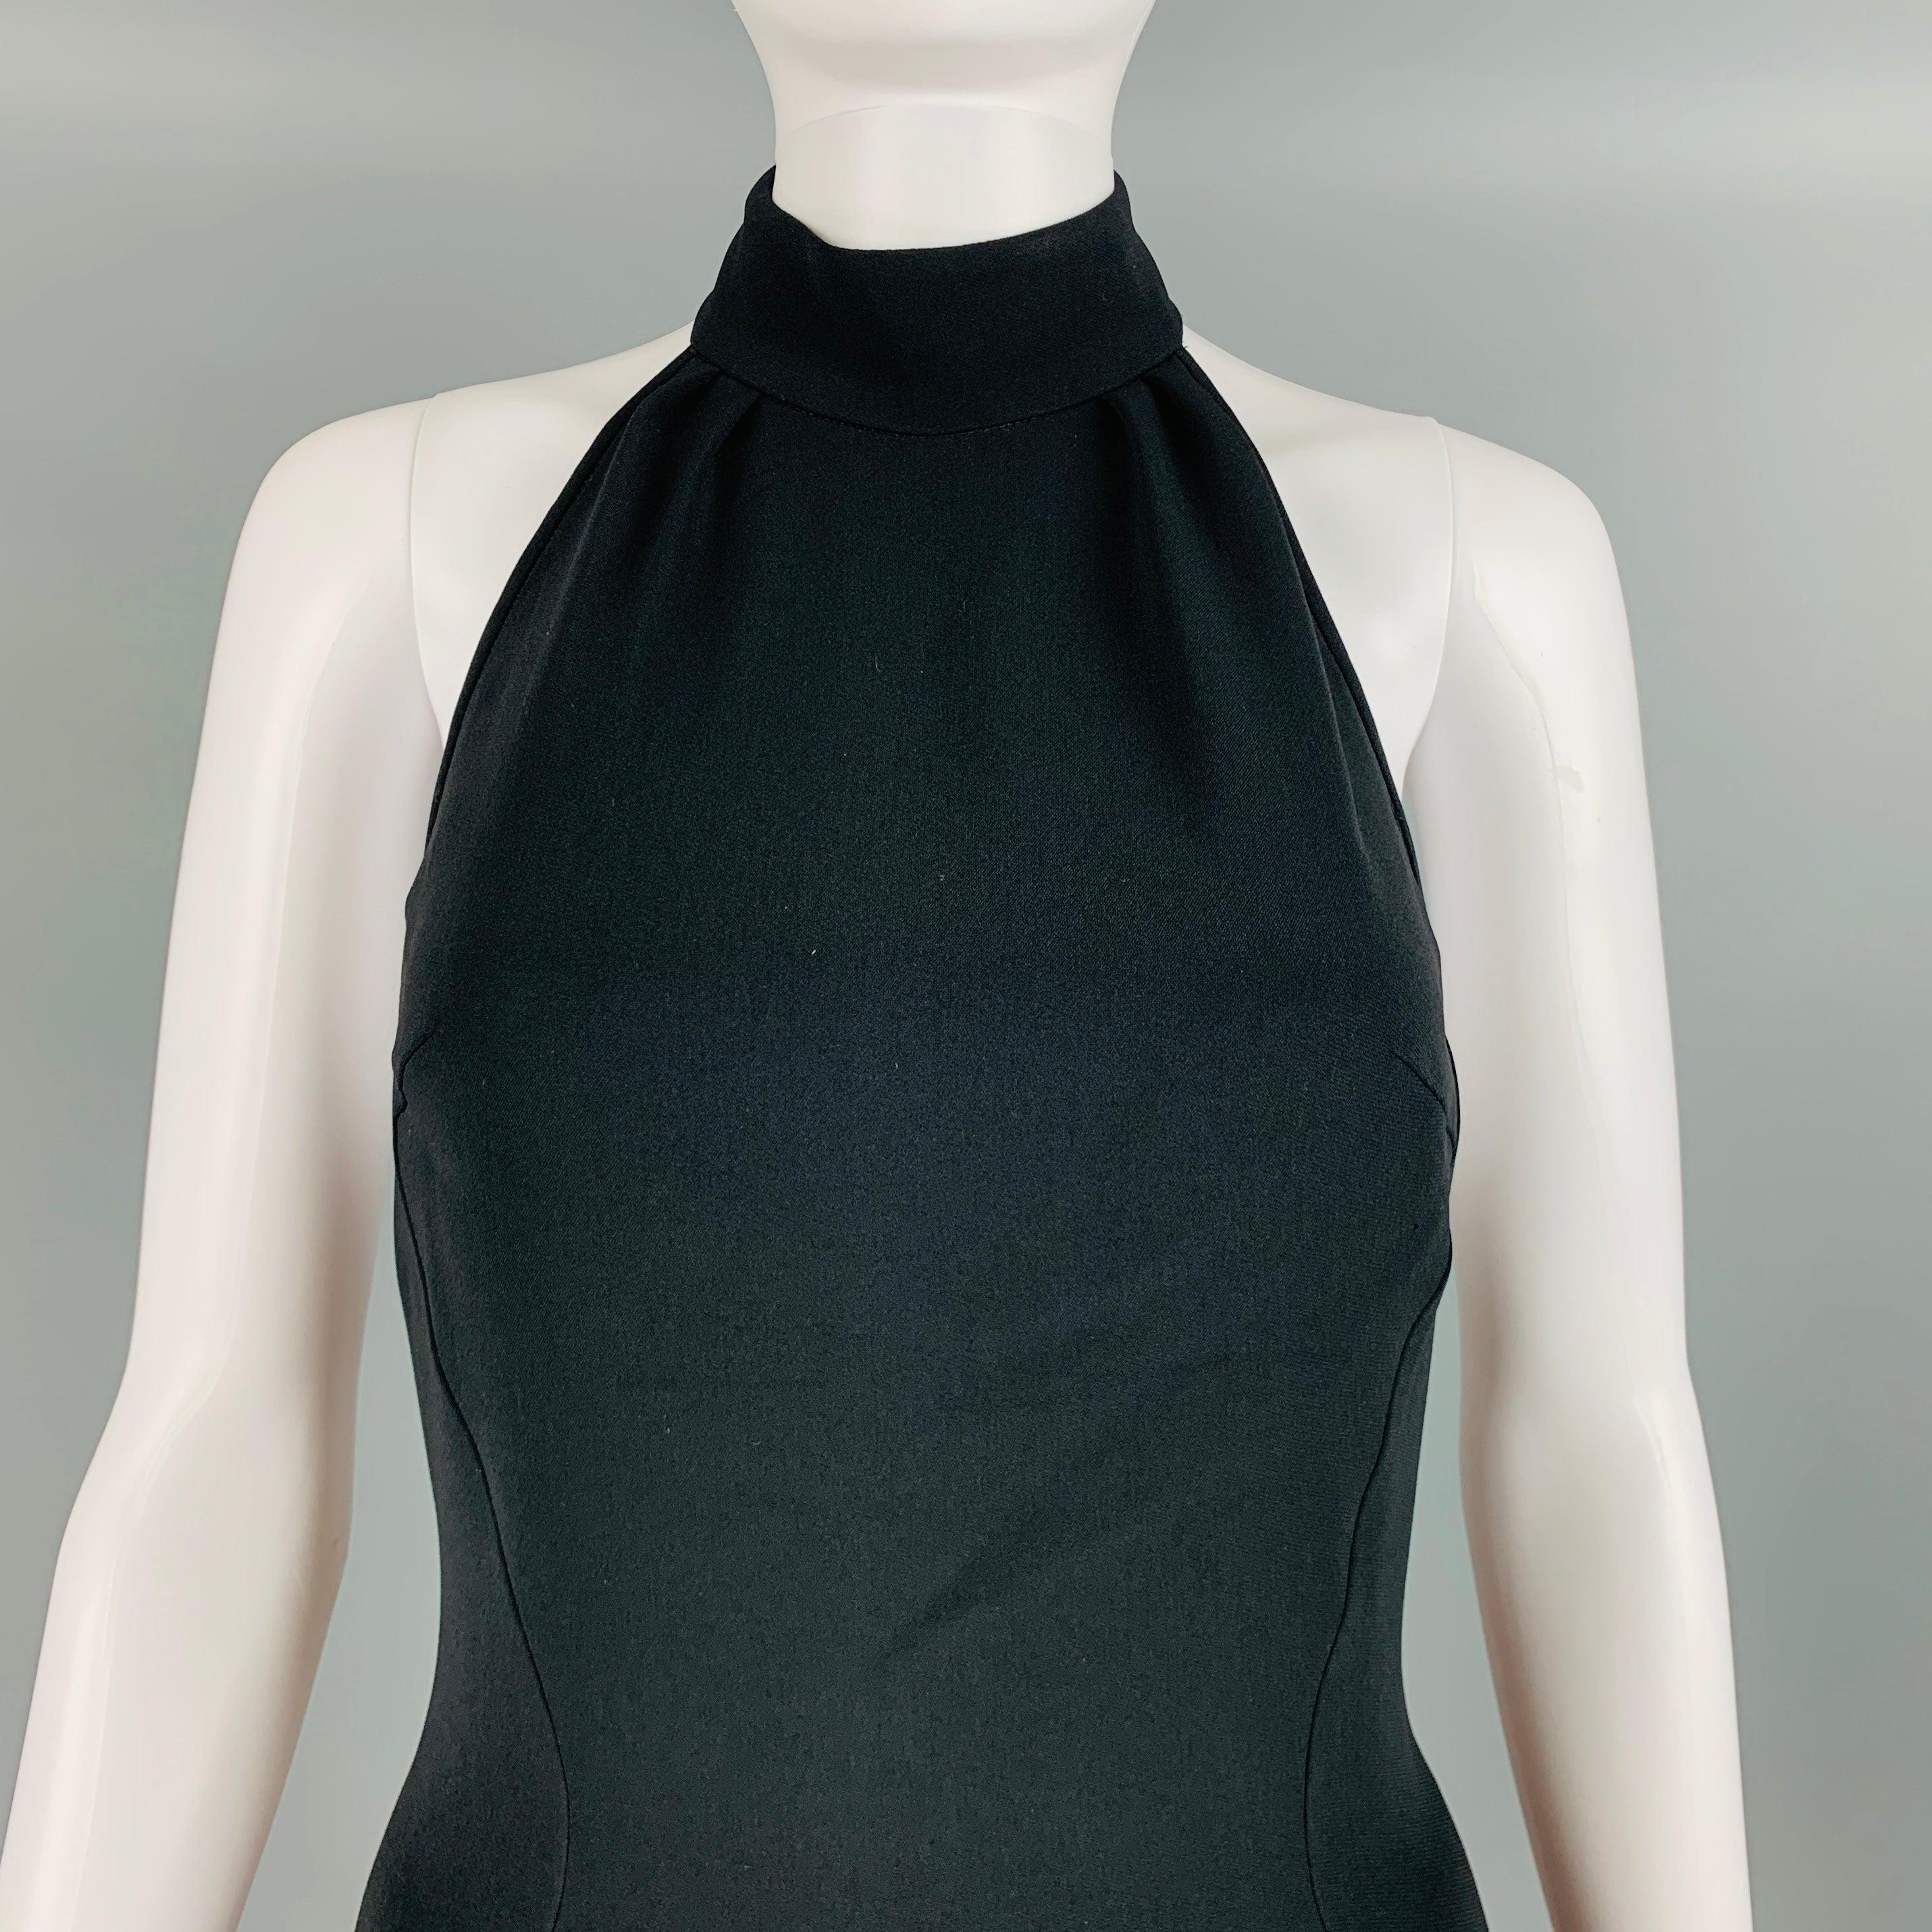 STELLA McCARTNEY above knee dress comes in a black viscose blend woven material featuring a halter design, tulip skirt, open back, and a side zip up closure. Very Good Pre-Owned Condition. Moderate signs of wear 

Marked:   38 

Measurements: 
 